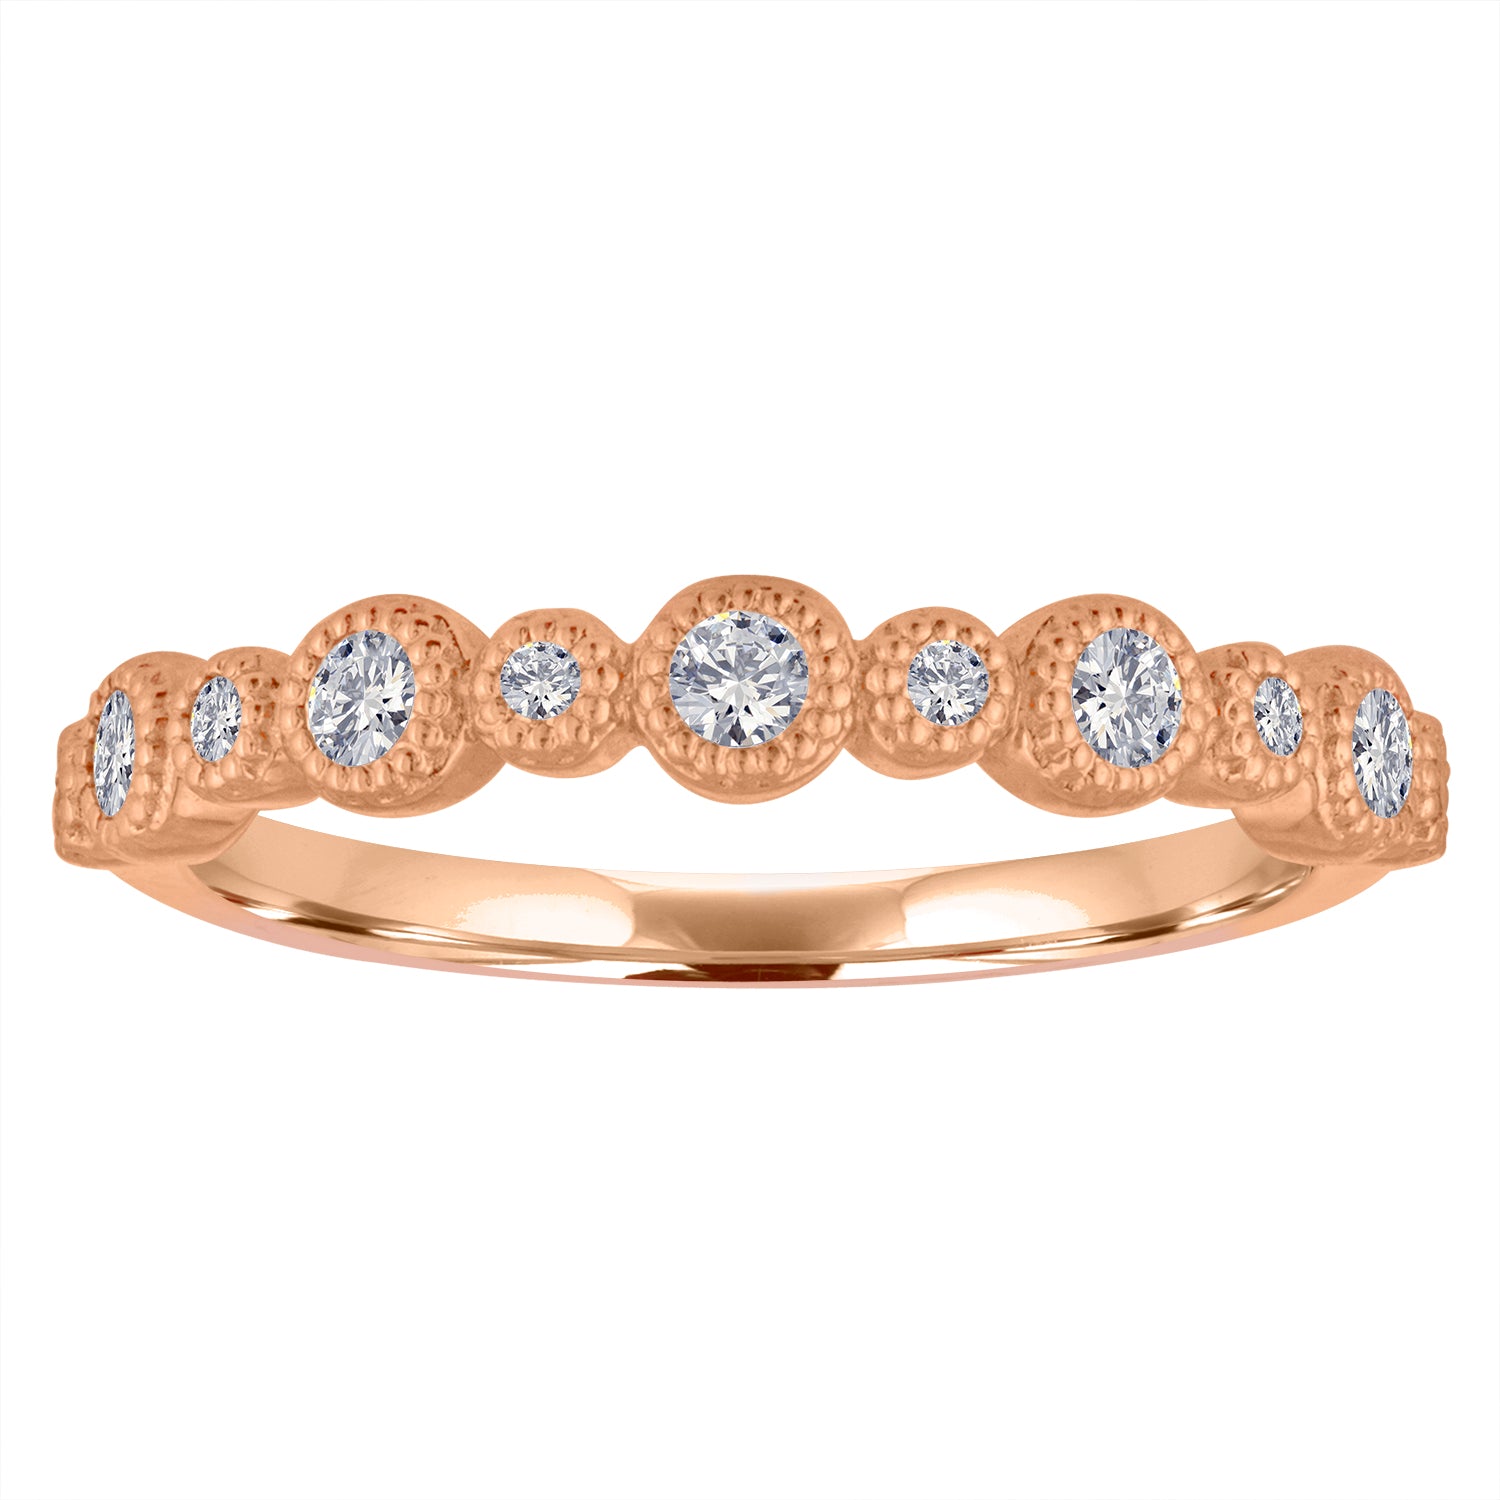 Rose gold skinny band with large round diamonds and small round diamonds.